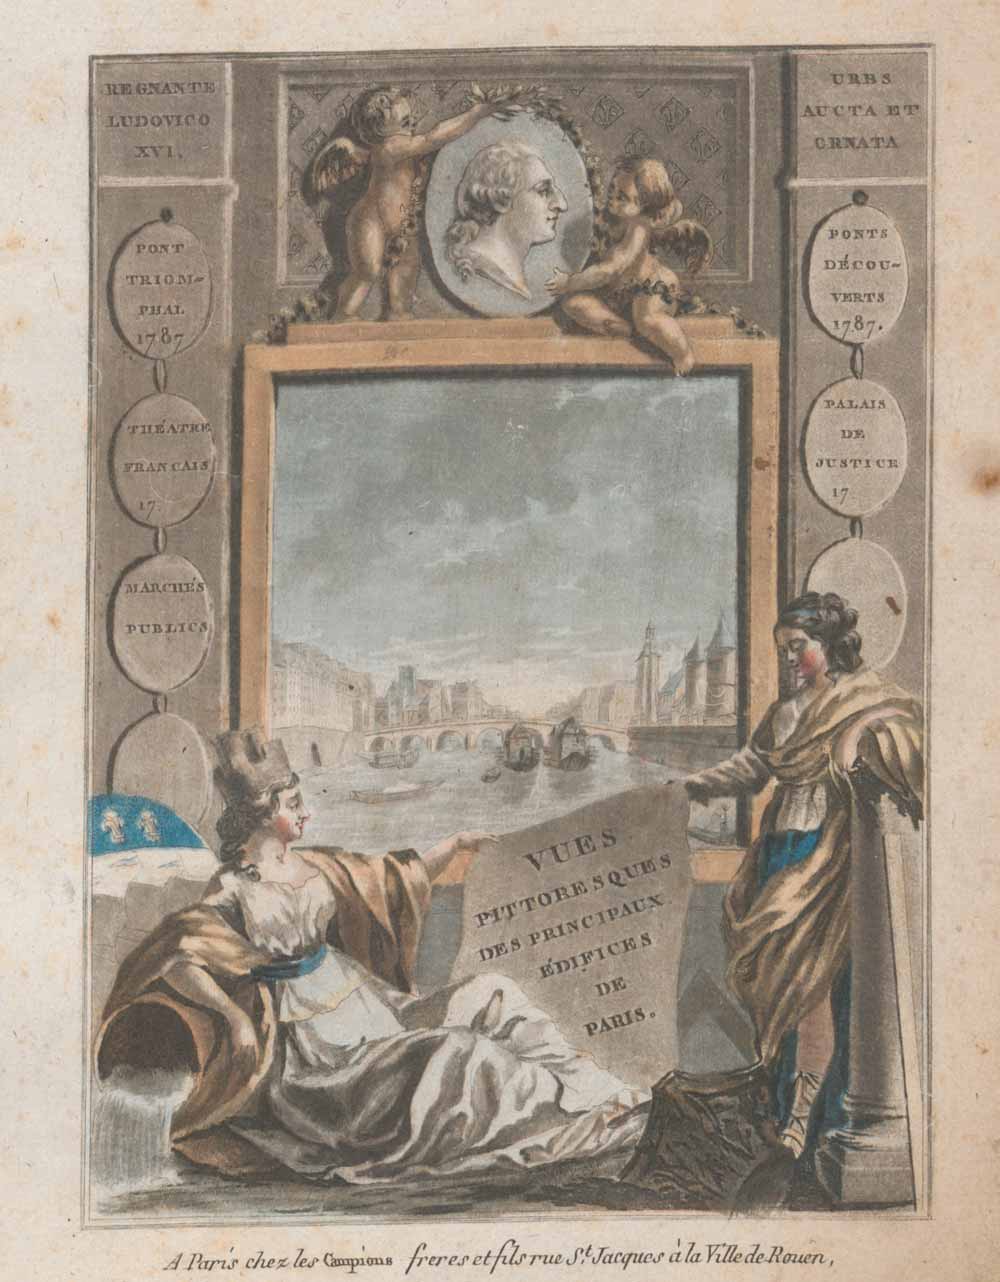 Title page of a book featuring two robed figures holding a scroll, two putti crowning a bust of a man, and a scene of the Seine in Paris